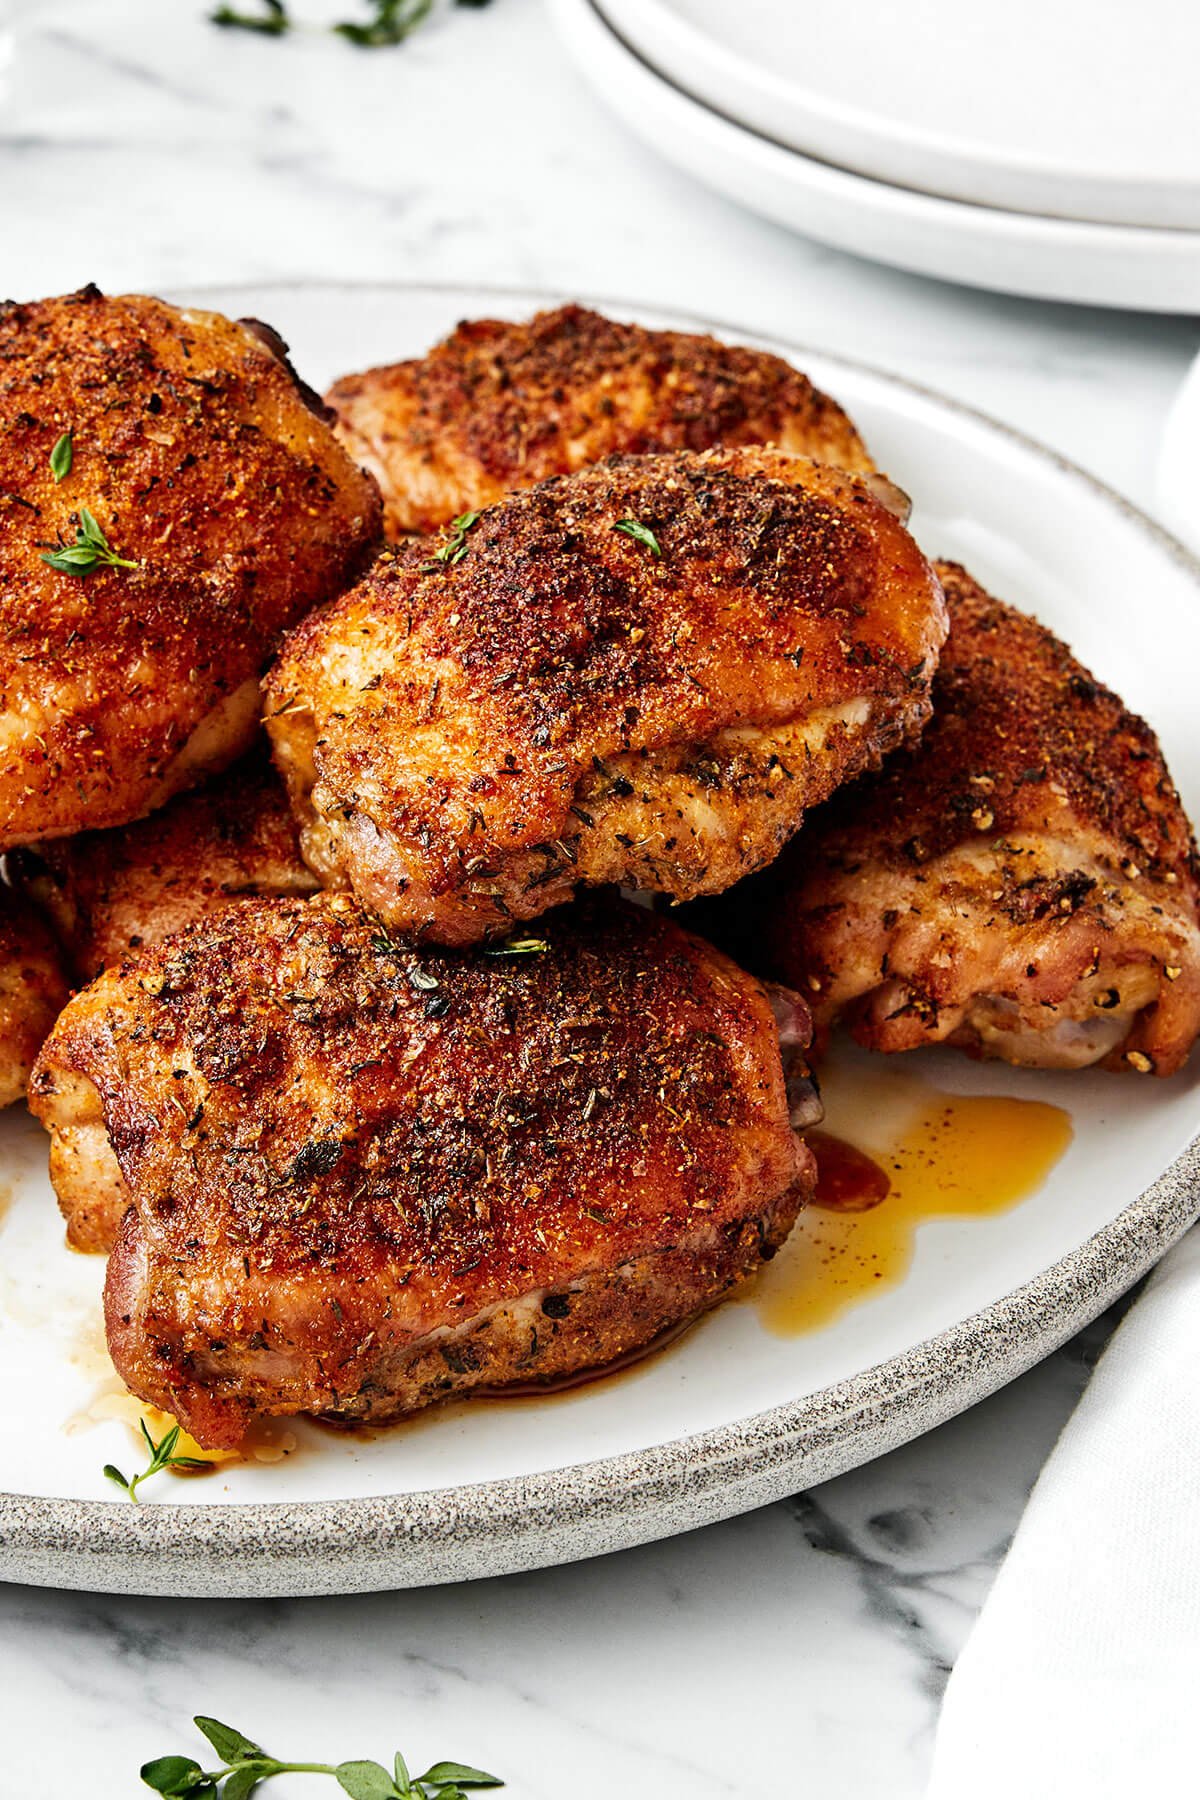 Crispy baked chicken thighs on a plate.